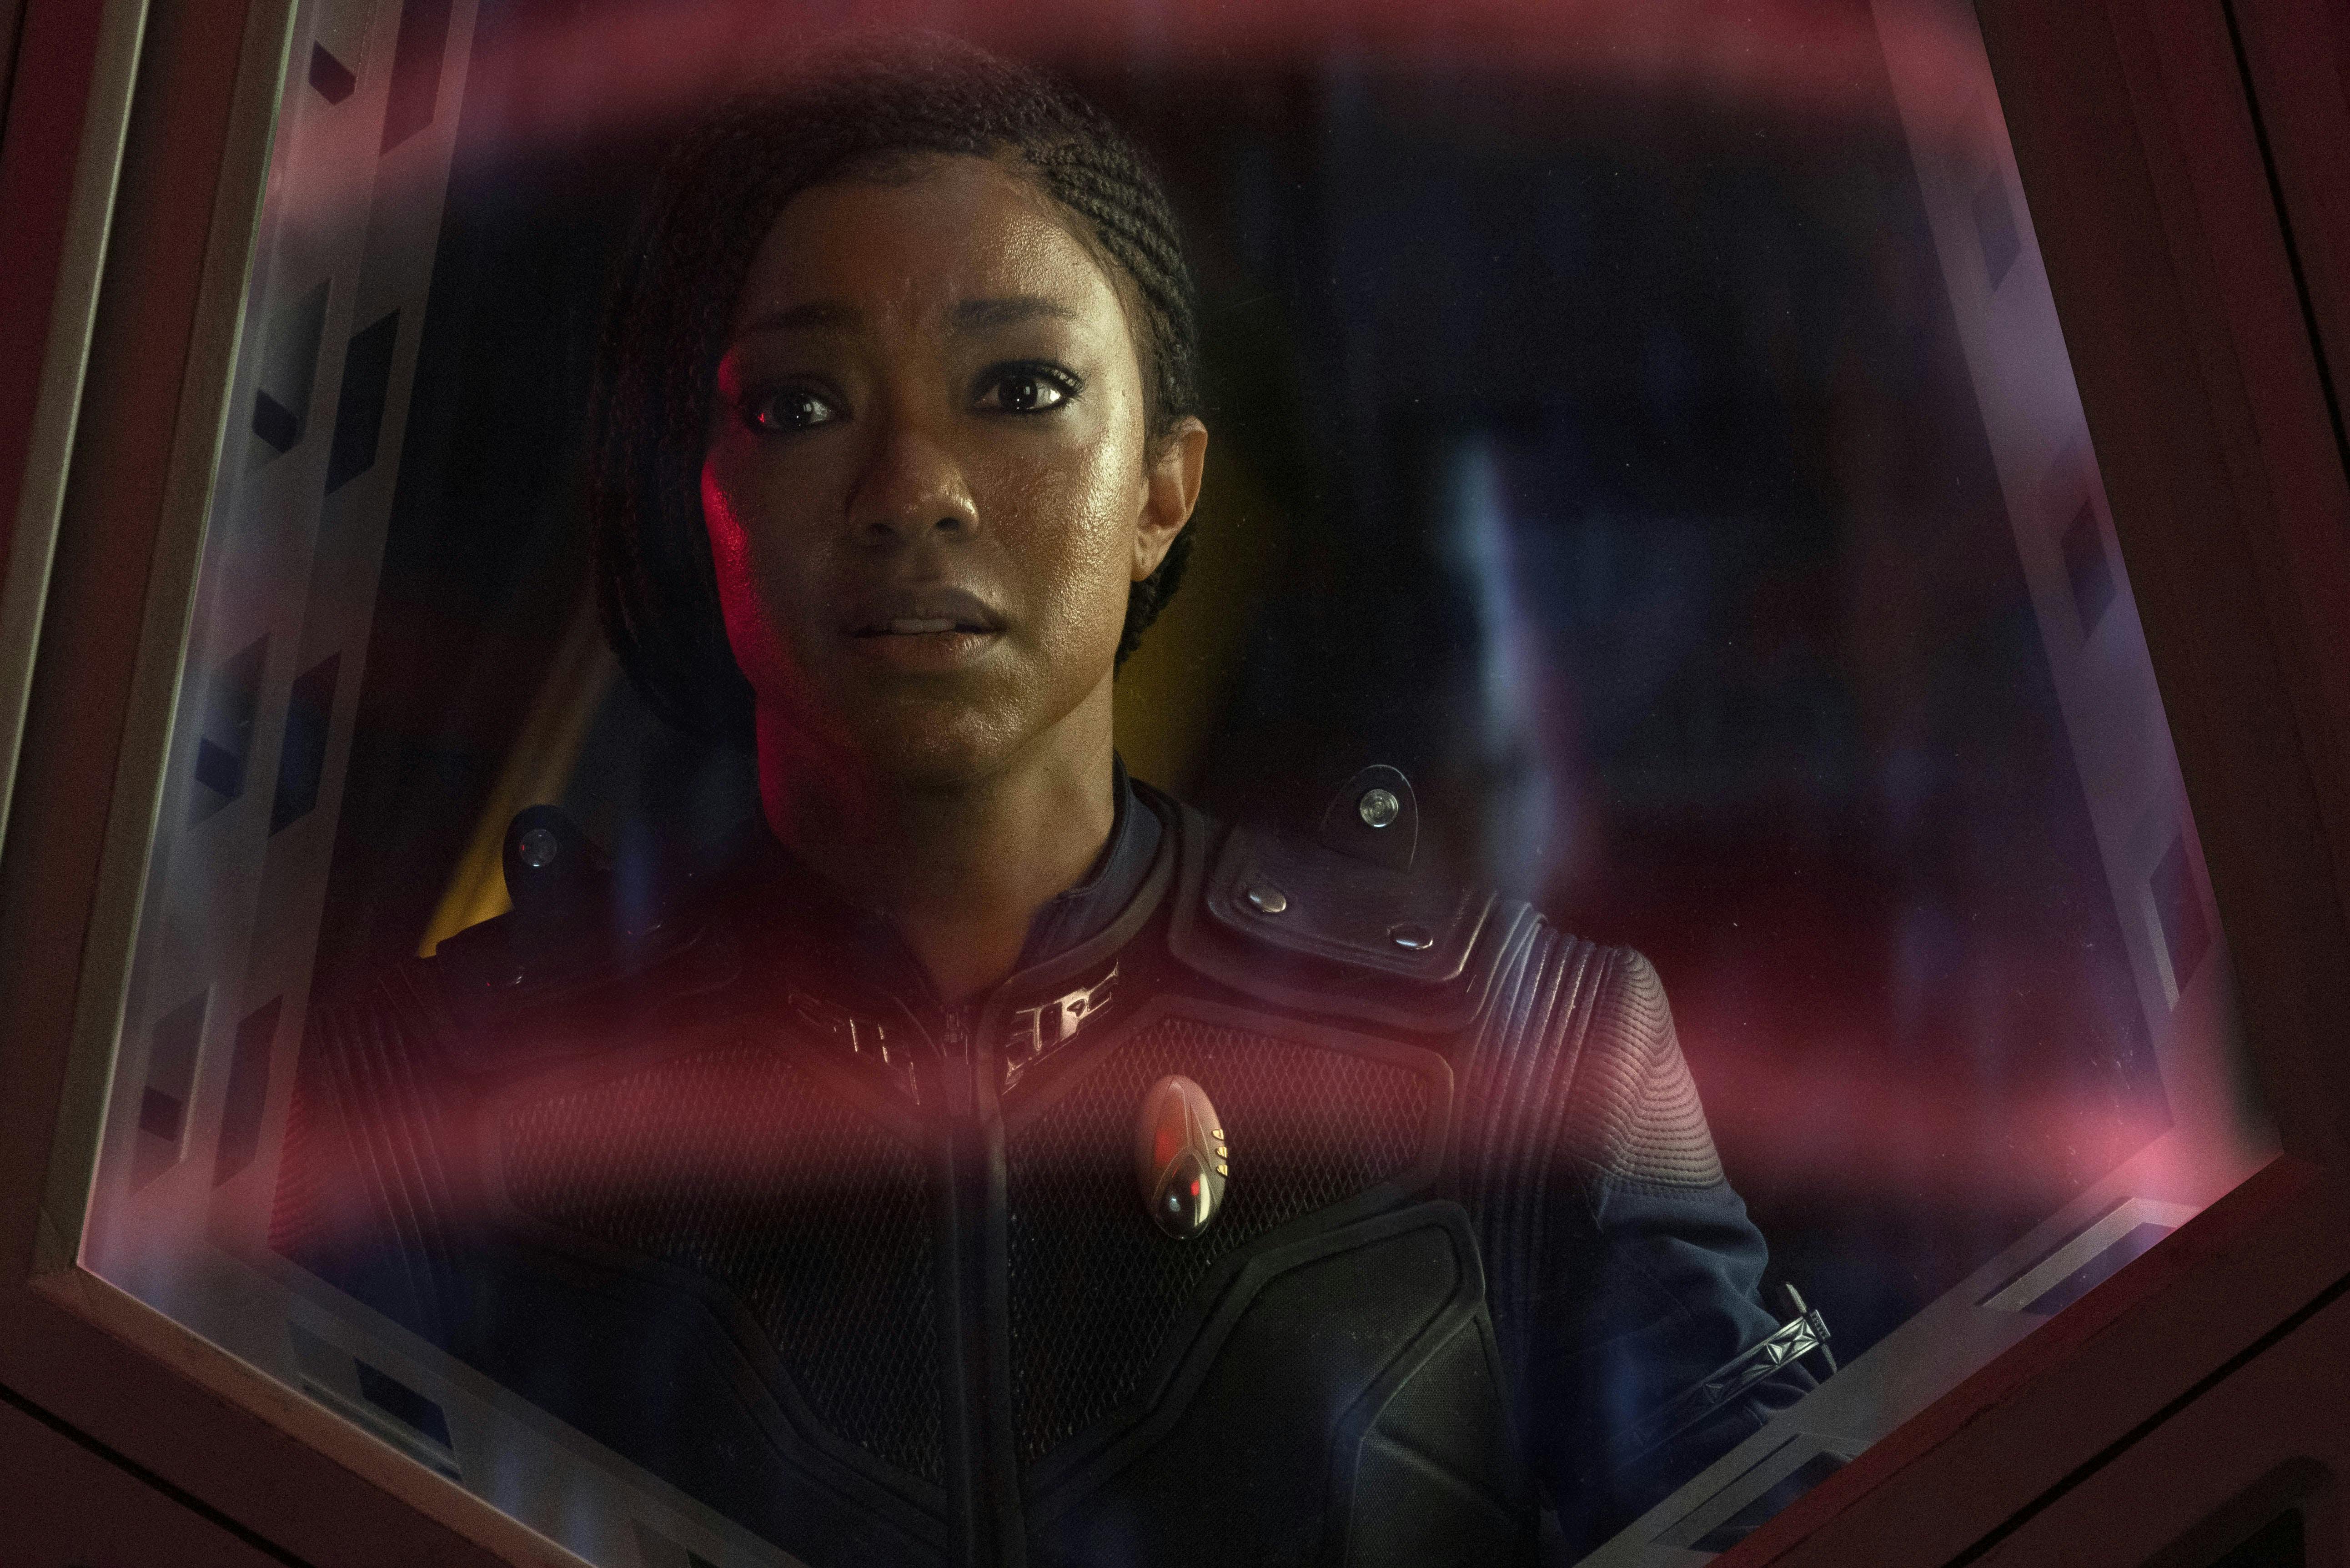 Star Trek: Discovery - "There Is A Tide..."